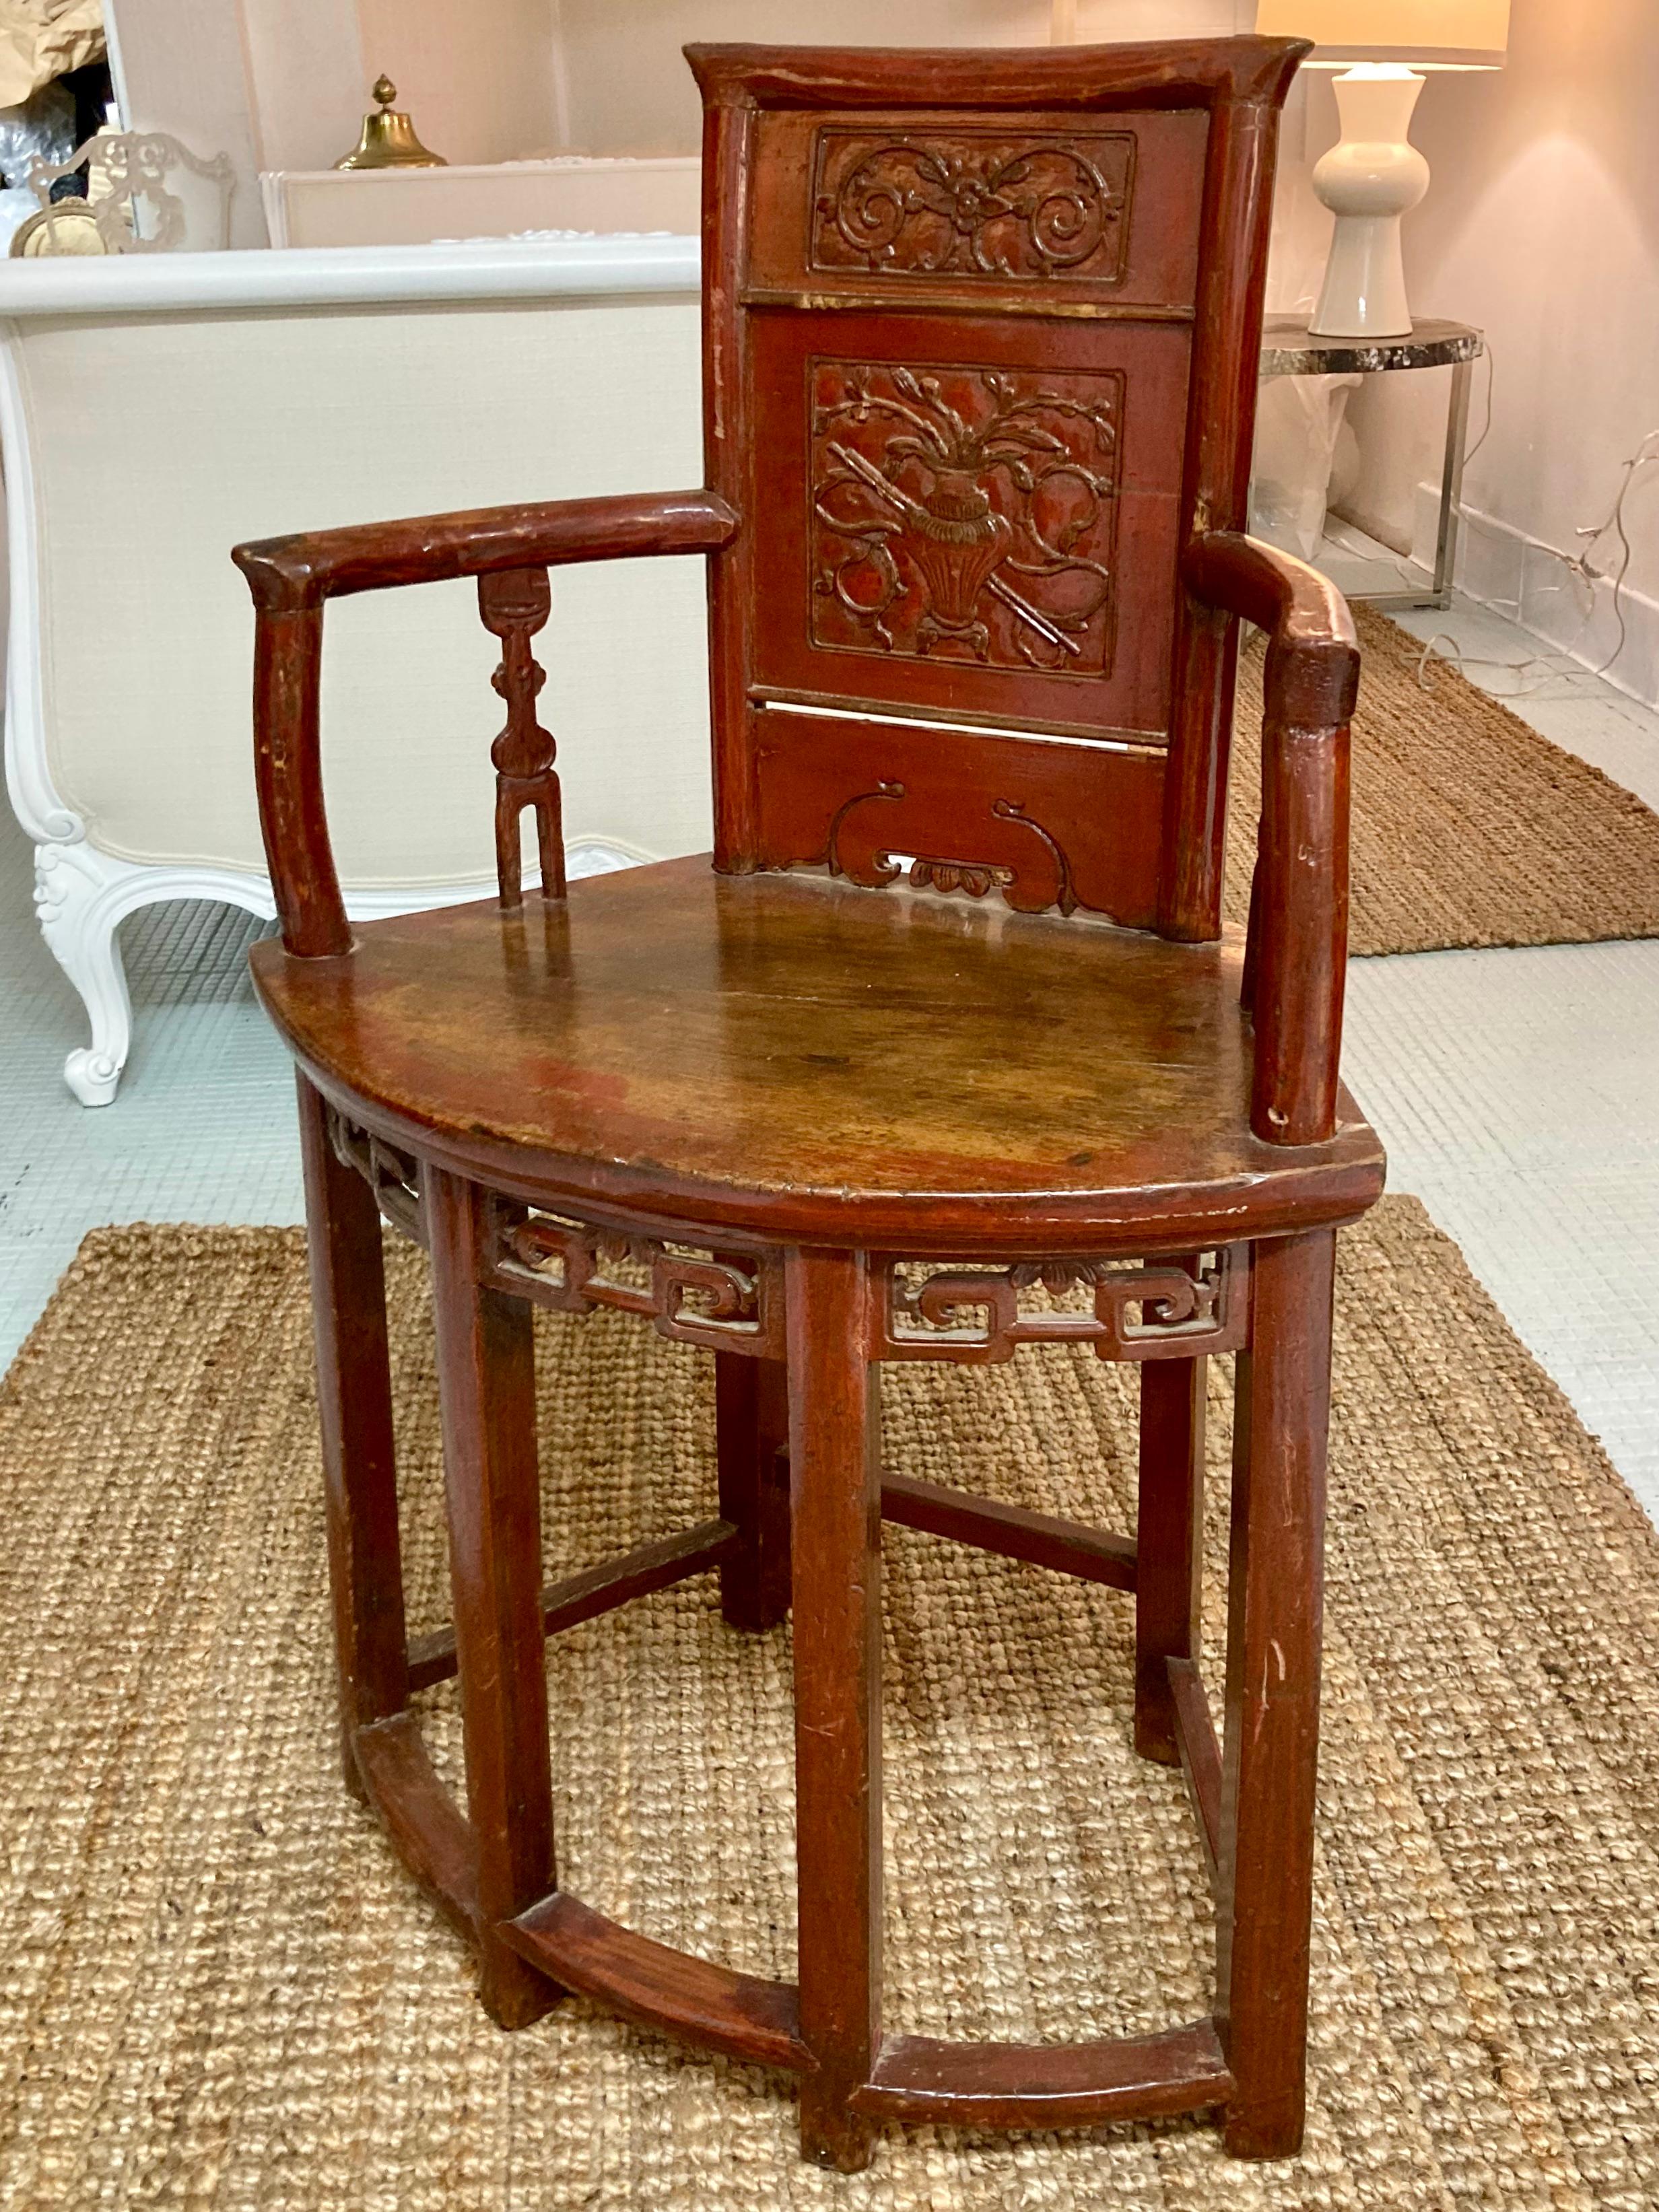 Beautiful Chinese Qing Dynasty corner chair. Unusual shaped chair, perfect addition to your collection or start with this amazing piece.